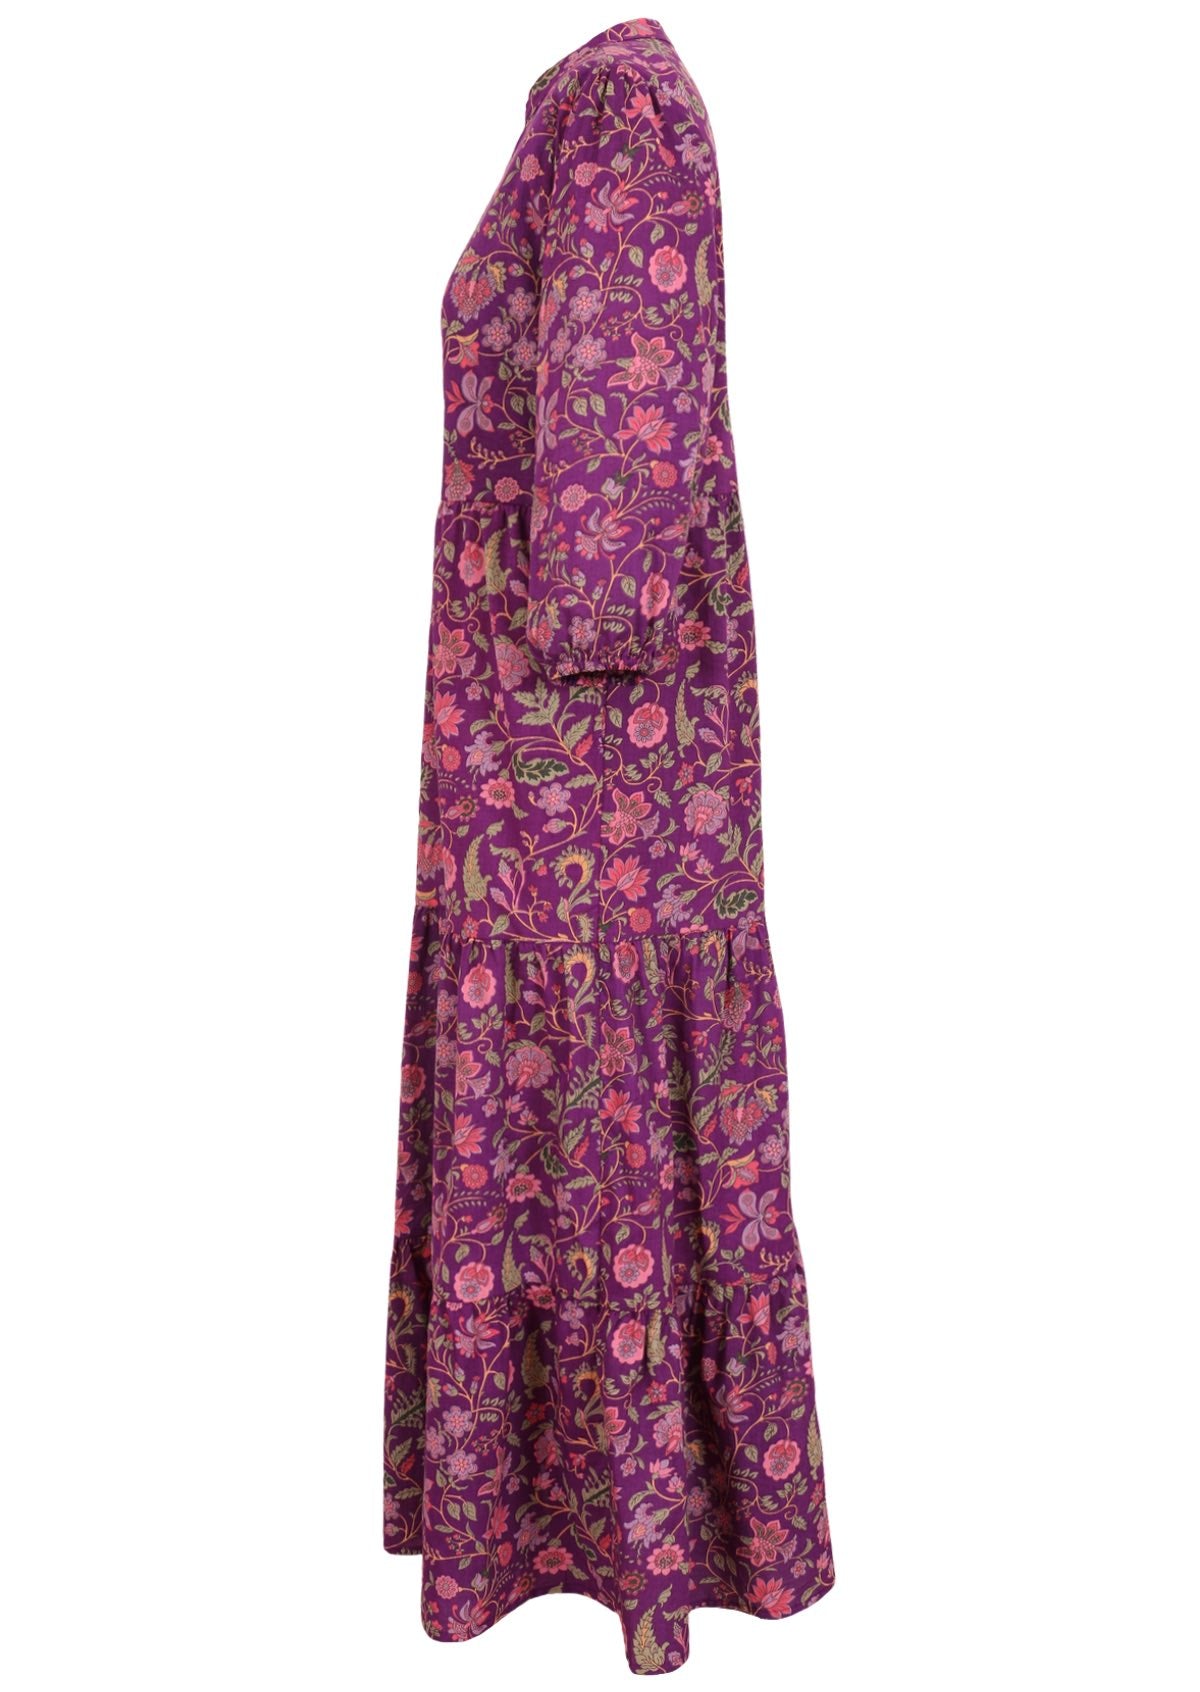 Cotton maxi dress with 3/4 sleeves and hidden side pockets